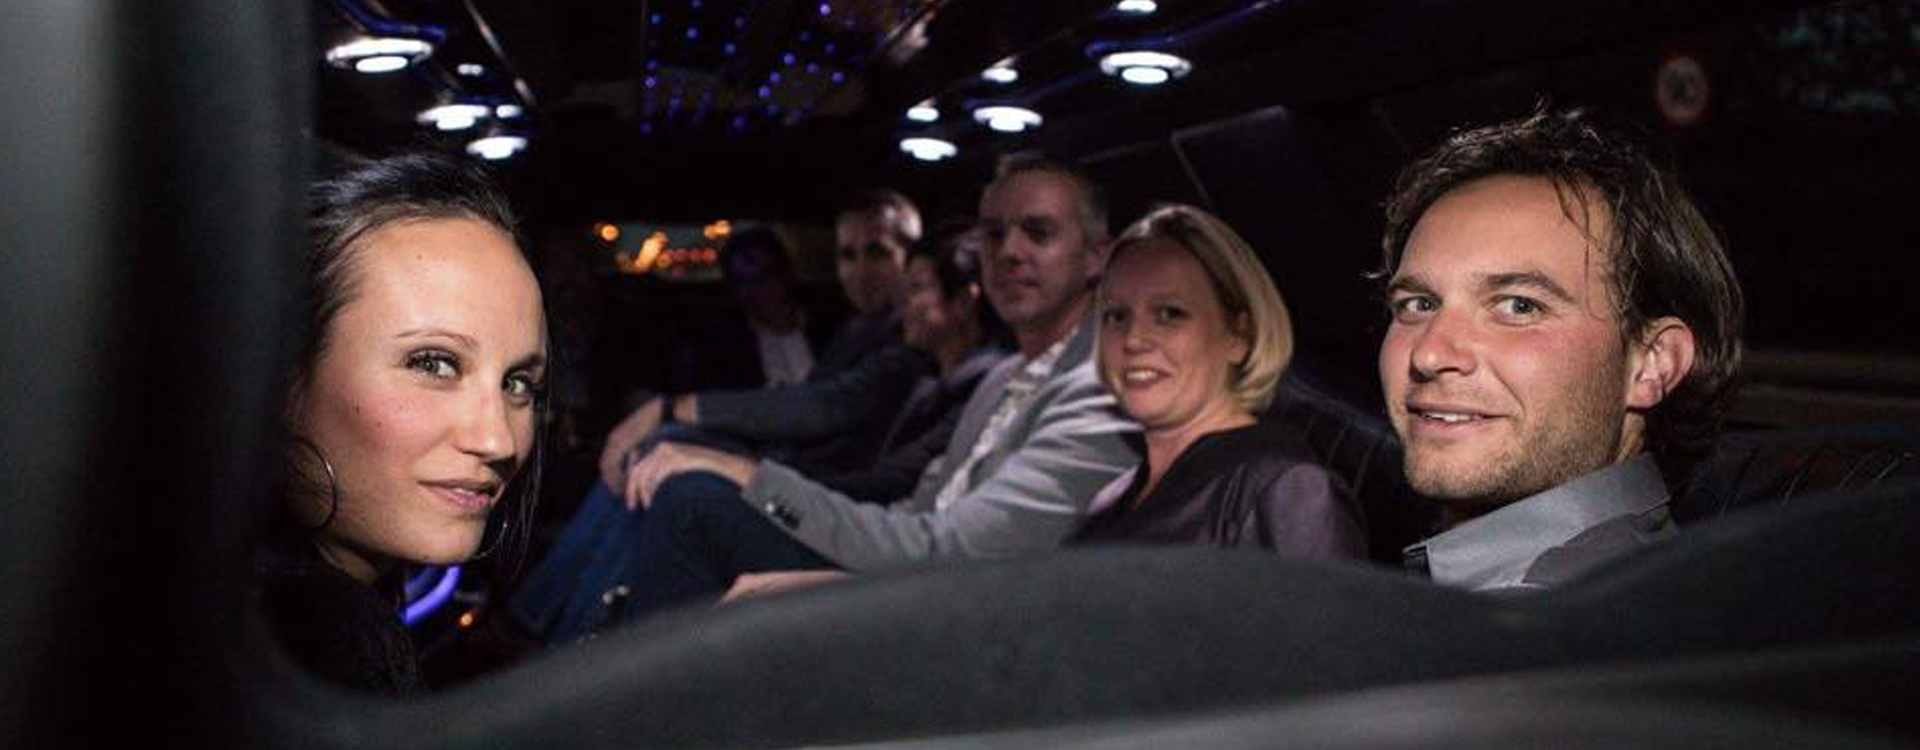 teambuilding in limousine